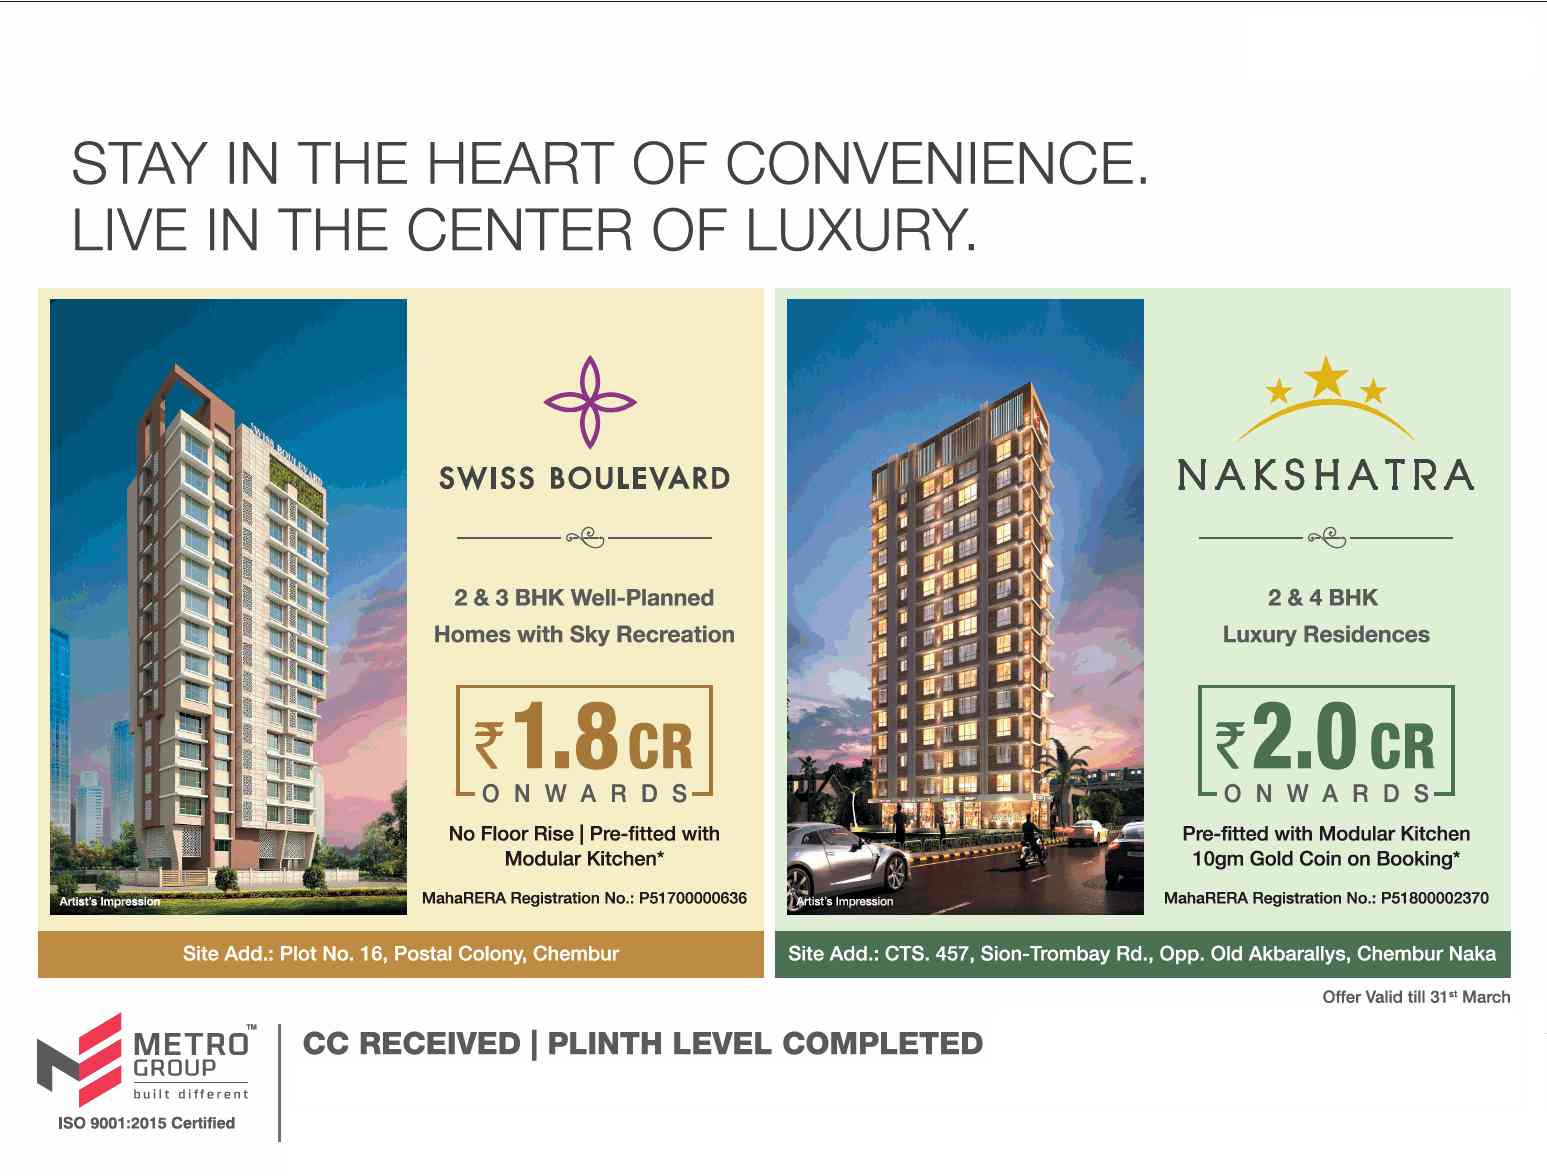 Invest in Metro Group properties & live in the center of luxury in Navi Mumbai Update